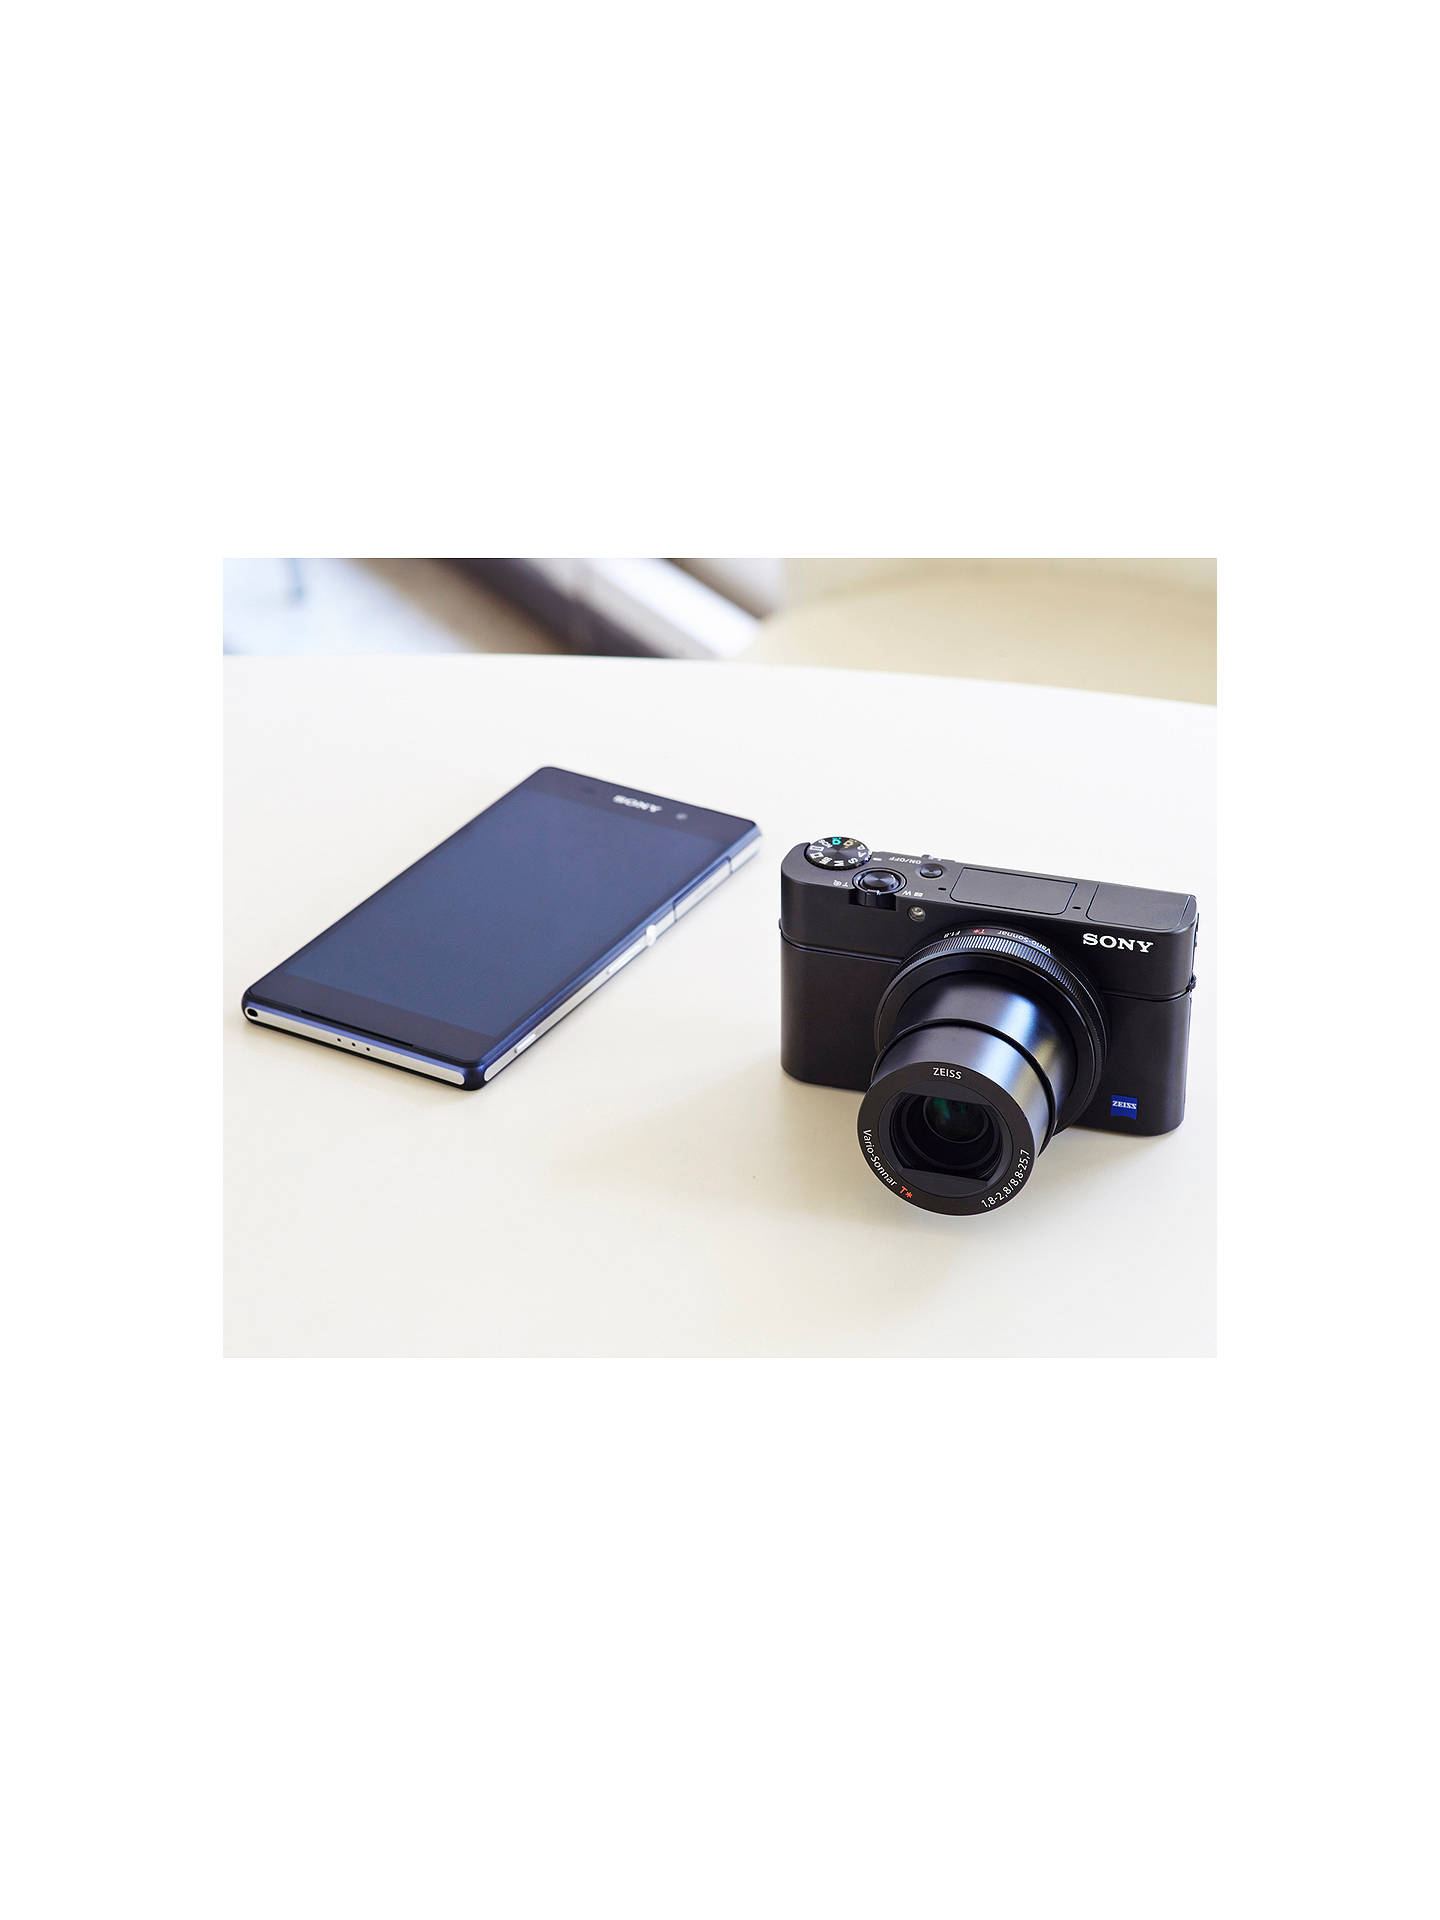 Sony Cyber Shot Dsc Rx100 Iii Camera Hd 1080p 1mp 2 9x Optical Zoom Wi Fi Nfc Oled Evf 3 Screen With Case Attachment Grip Kit At John Lewis Partners